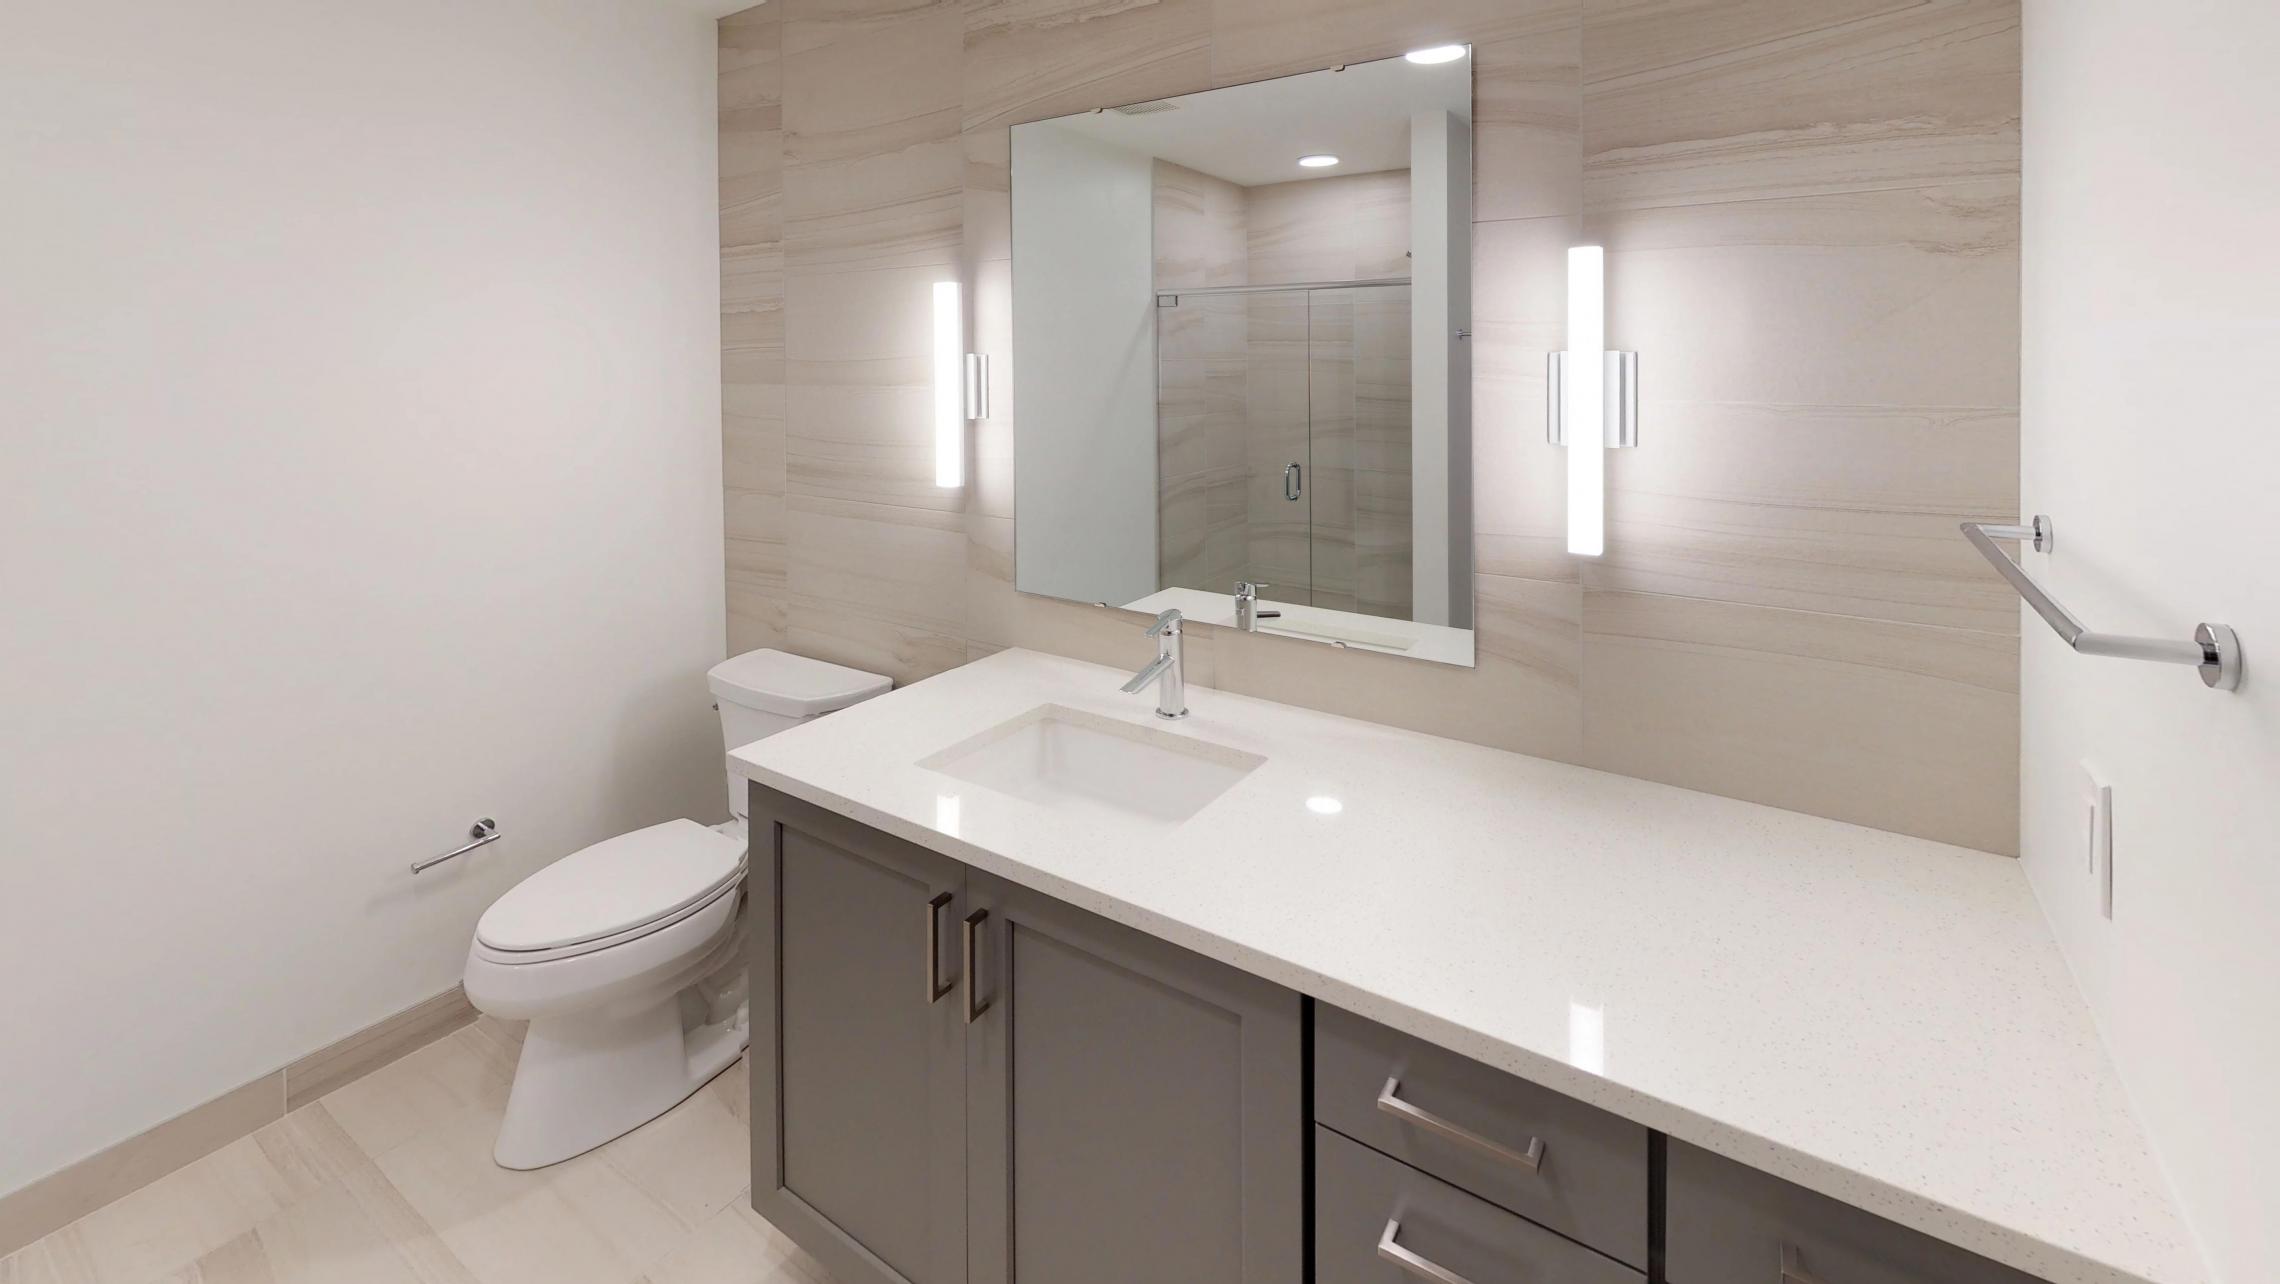 Pressman-601-Apartment-Two-Bedroom-Downtown-Madison-Upscale-Modern-Luxury-Bathroom-Views-Capitol